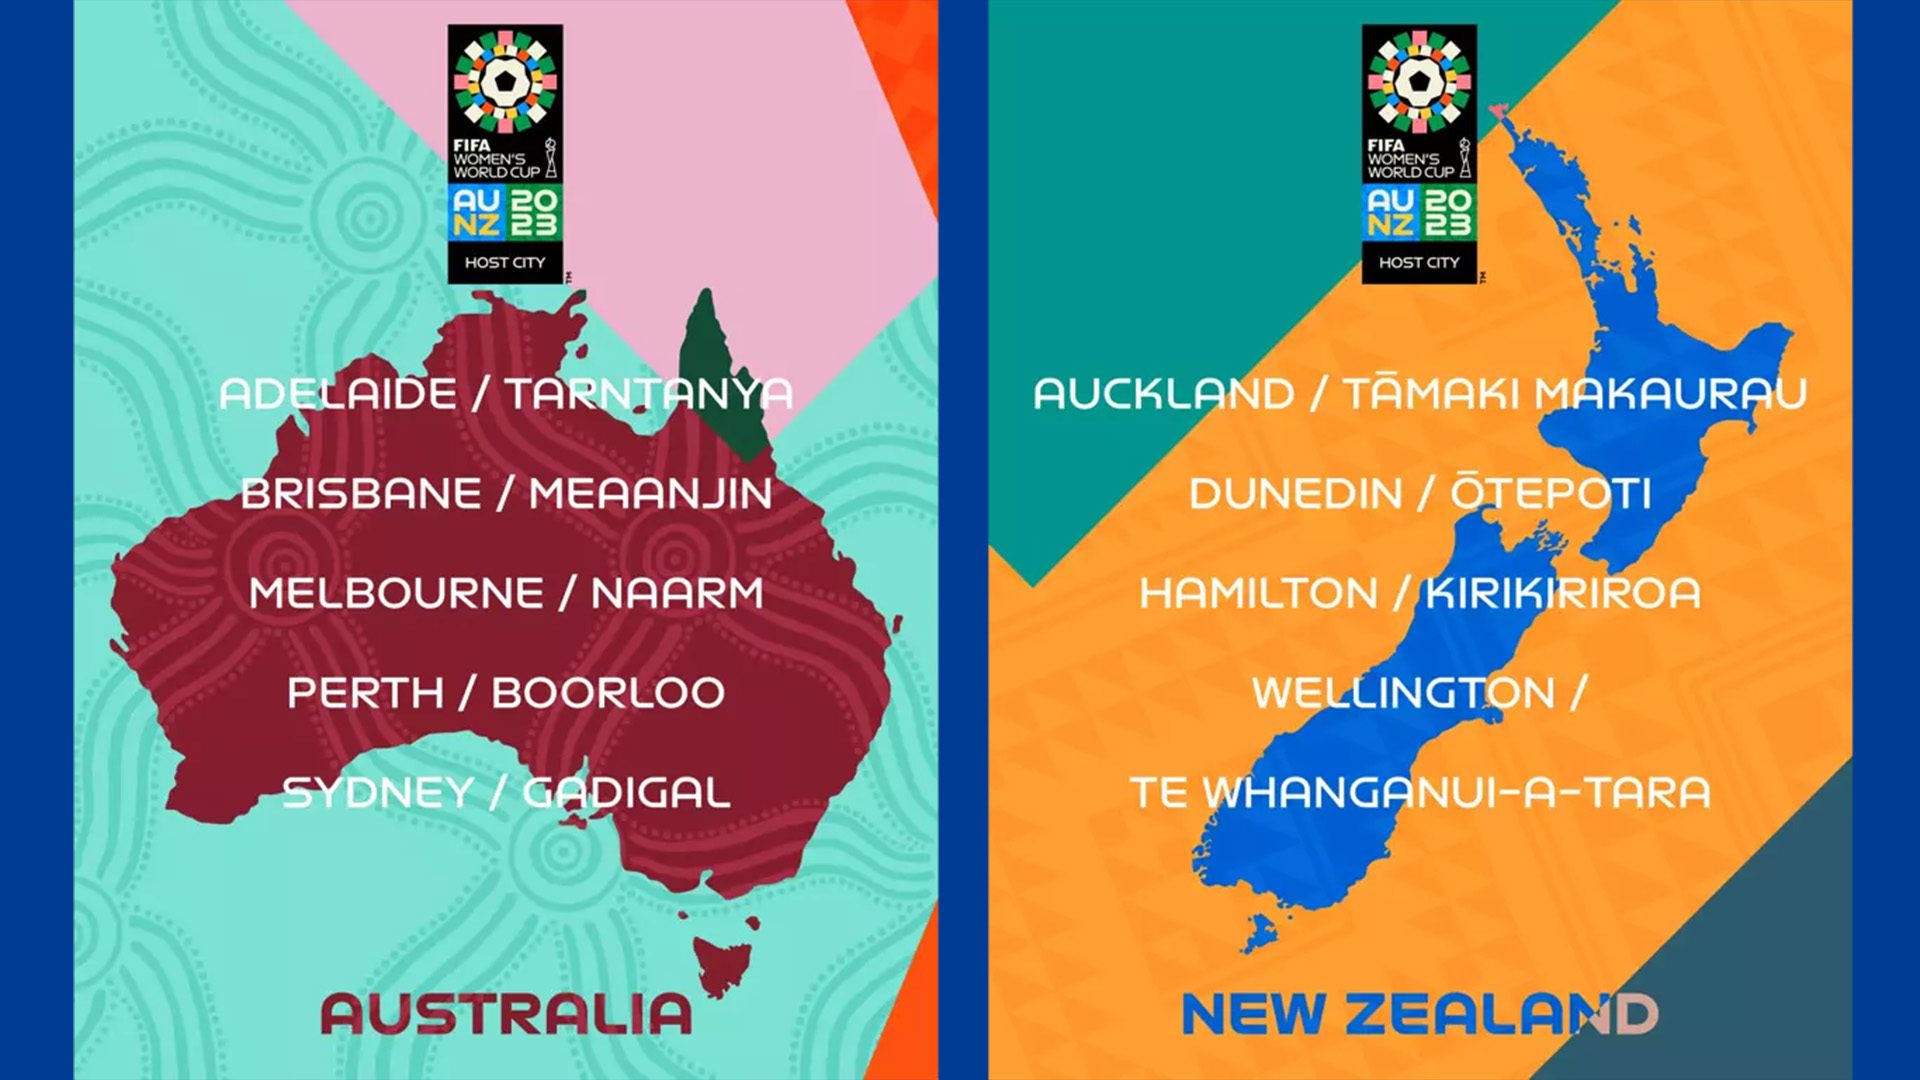 To express a spirit of mutual respect and recognition of Indigenous cultures of the tournament, every city that will host a match is listed with its English and Indigenous names